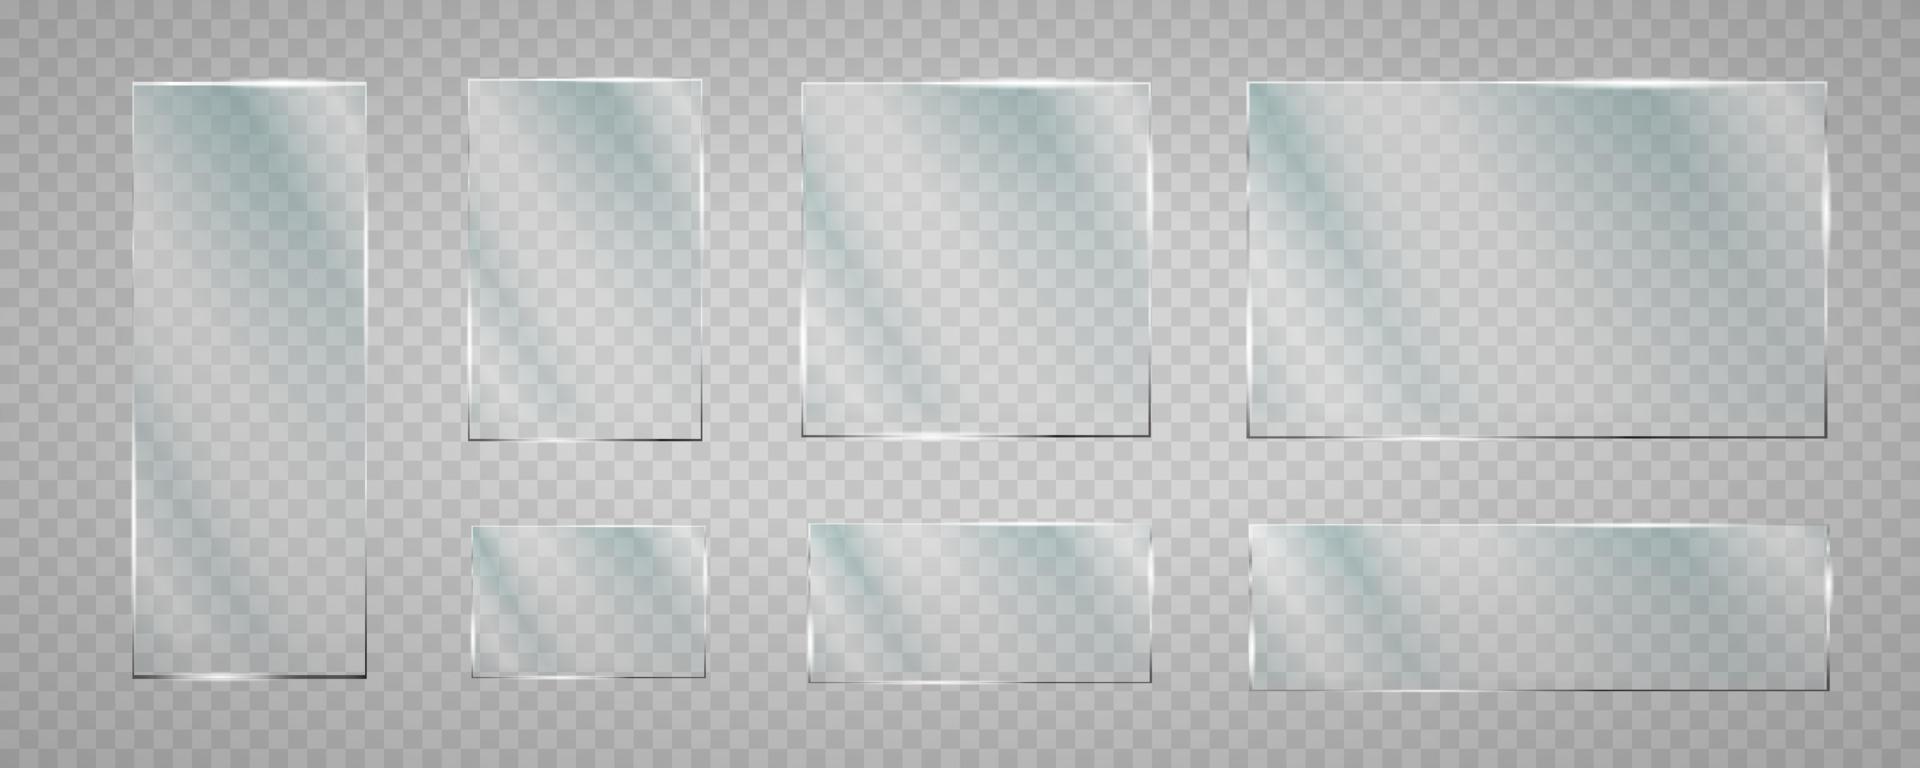 Glass plate set on transparent backdrop. Isolated glass. vector